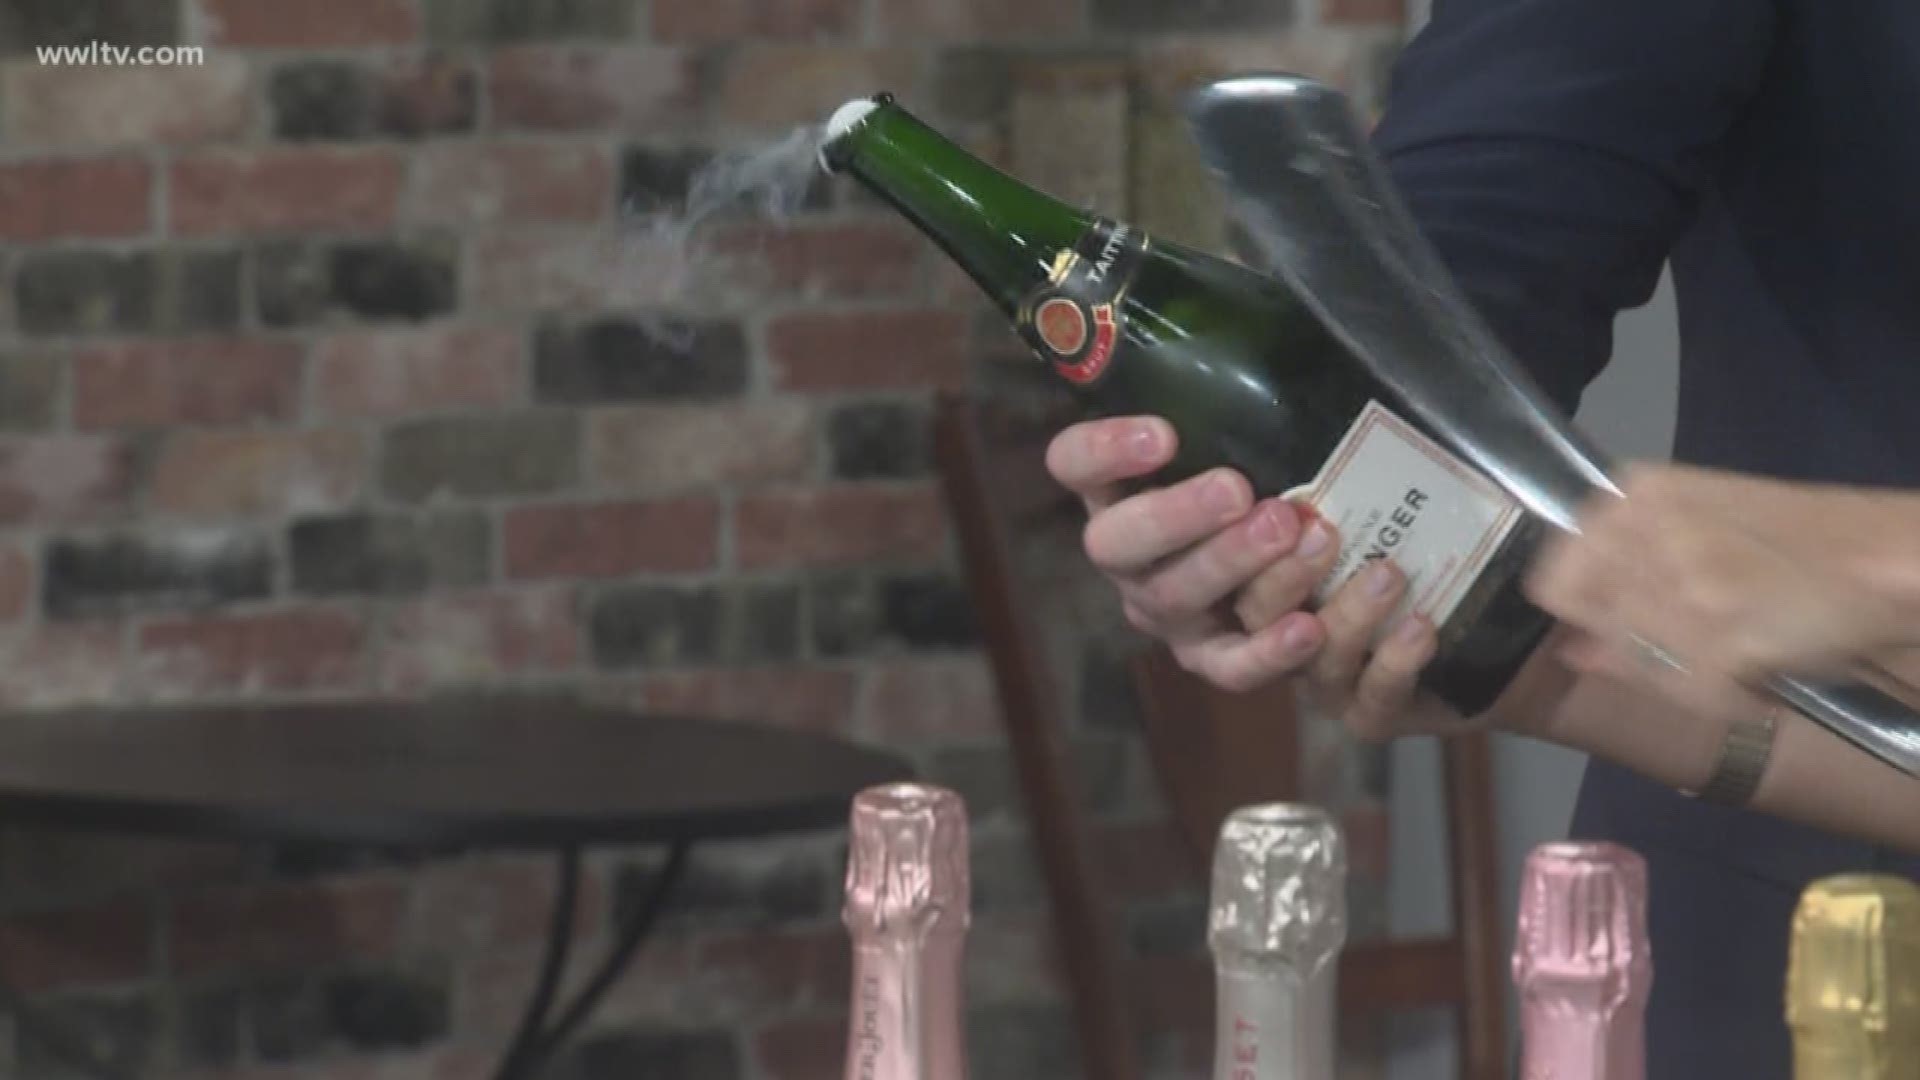 Patrick Brennan with Brennan's Restaurant is showing us how to saber a Champagne bottle in honor of their of their week long Happy Hour.